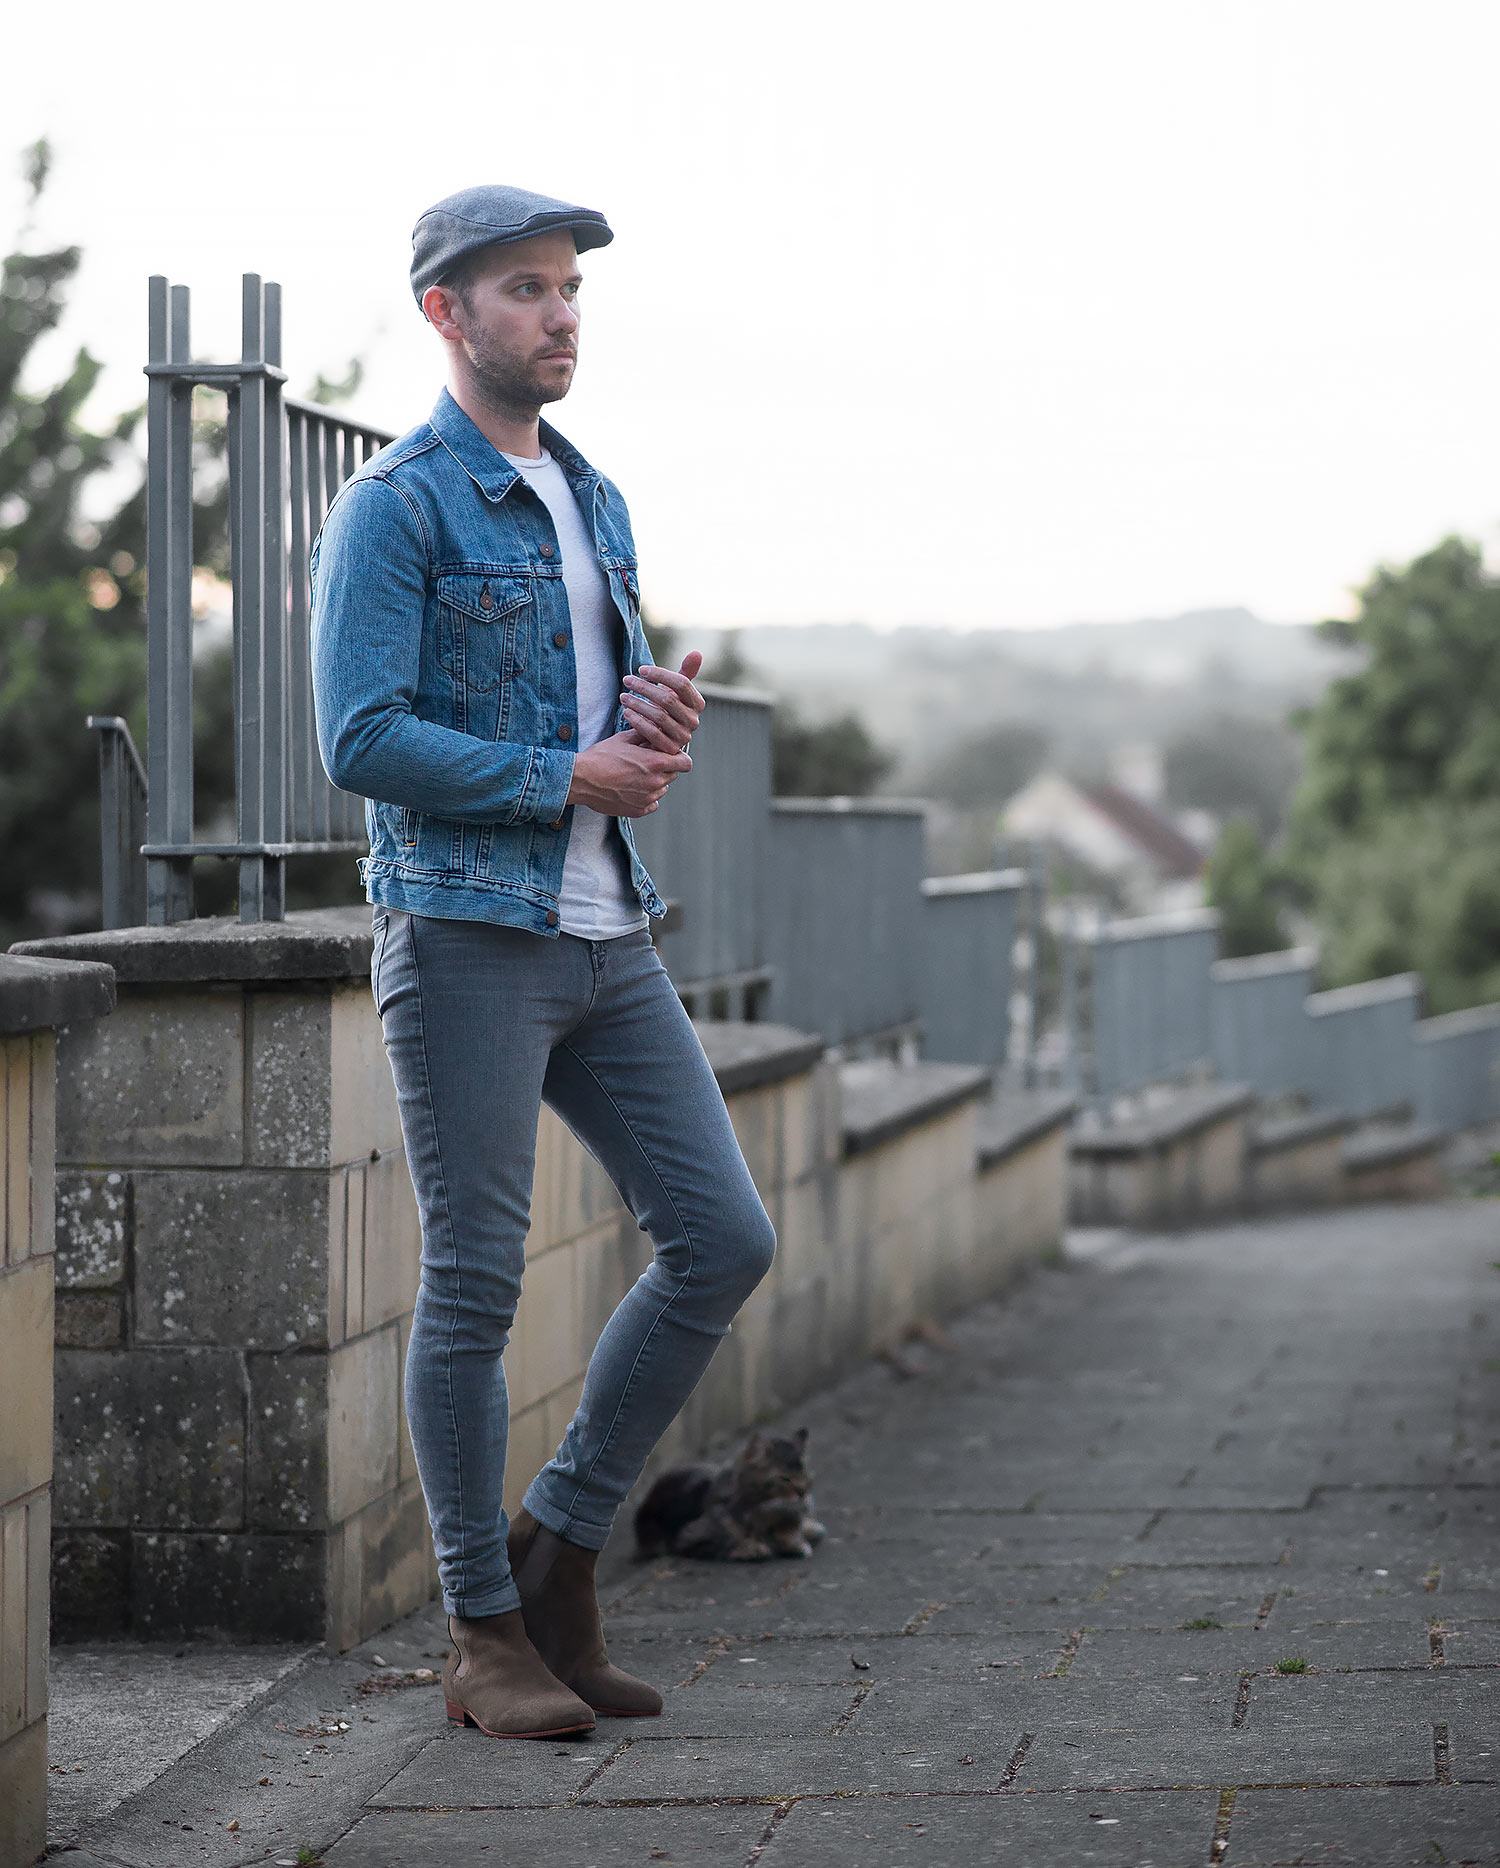 How To Wear Grey Jeans - 20 Outfits With Grey Jeans for Men